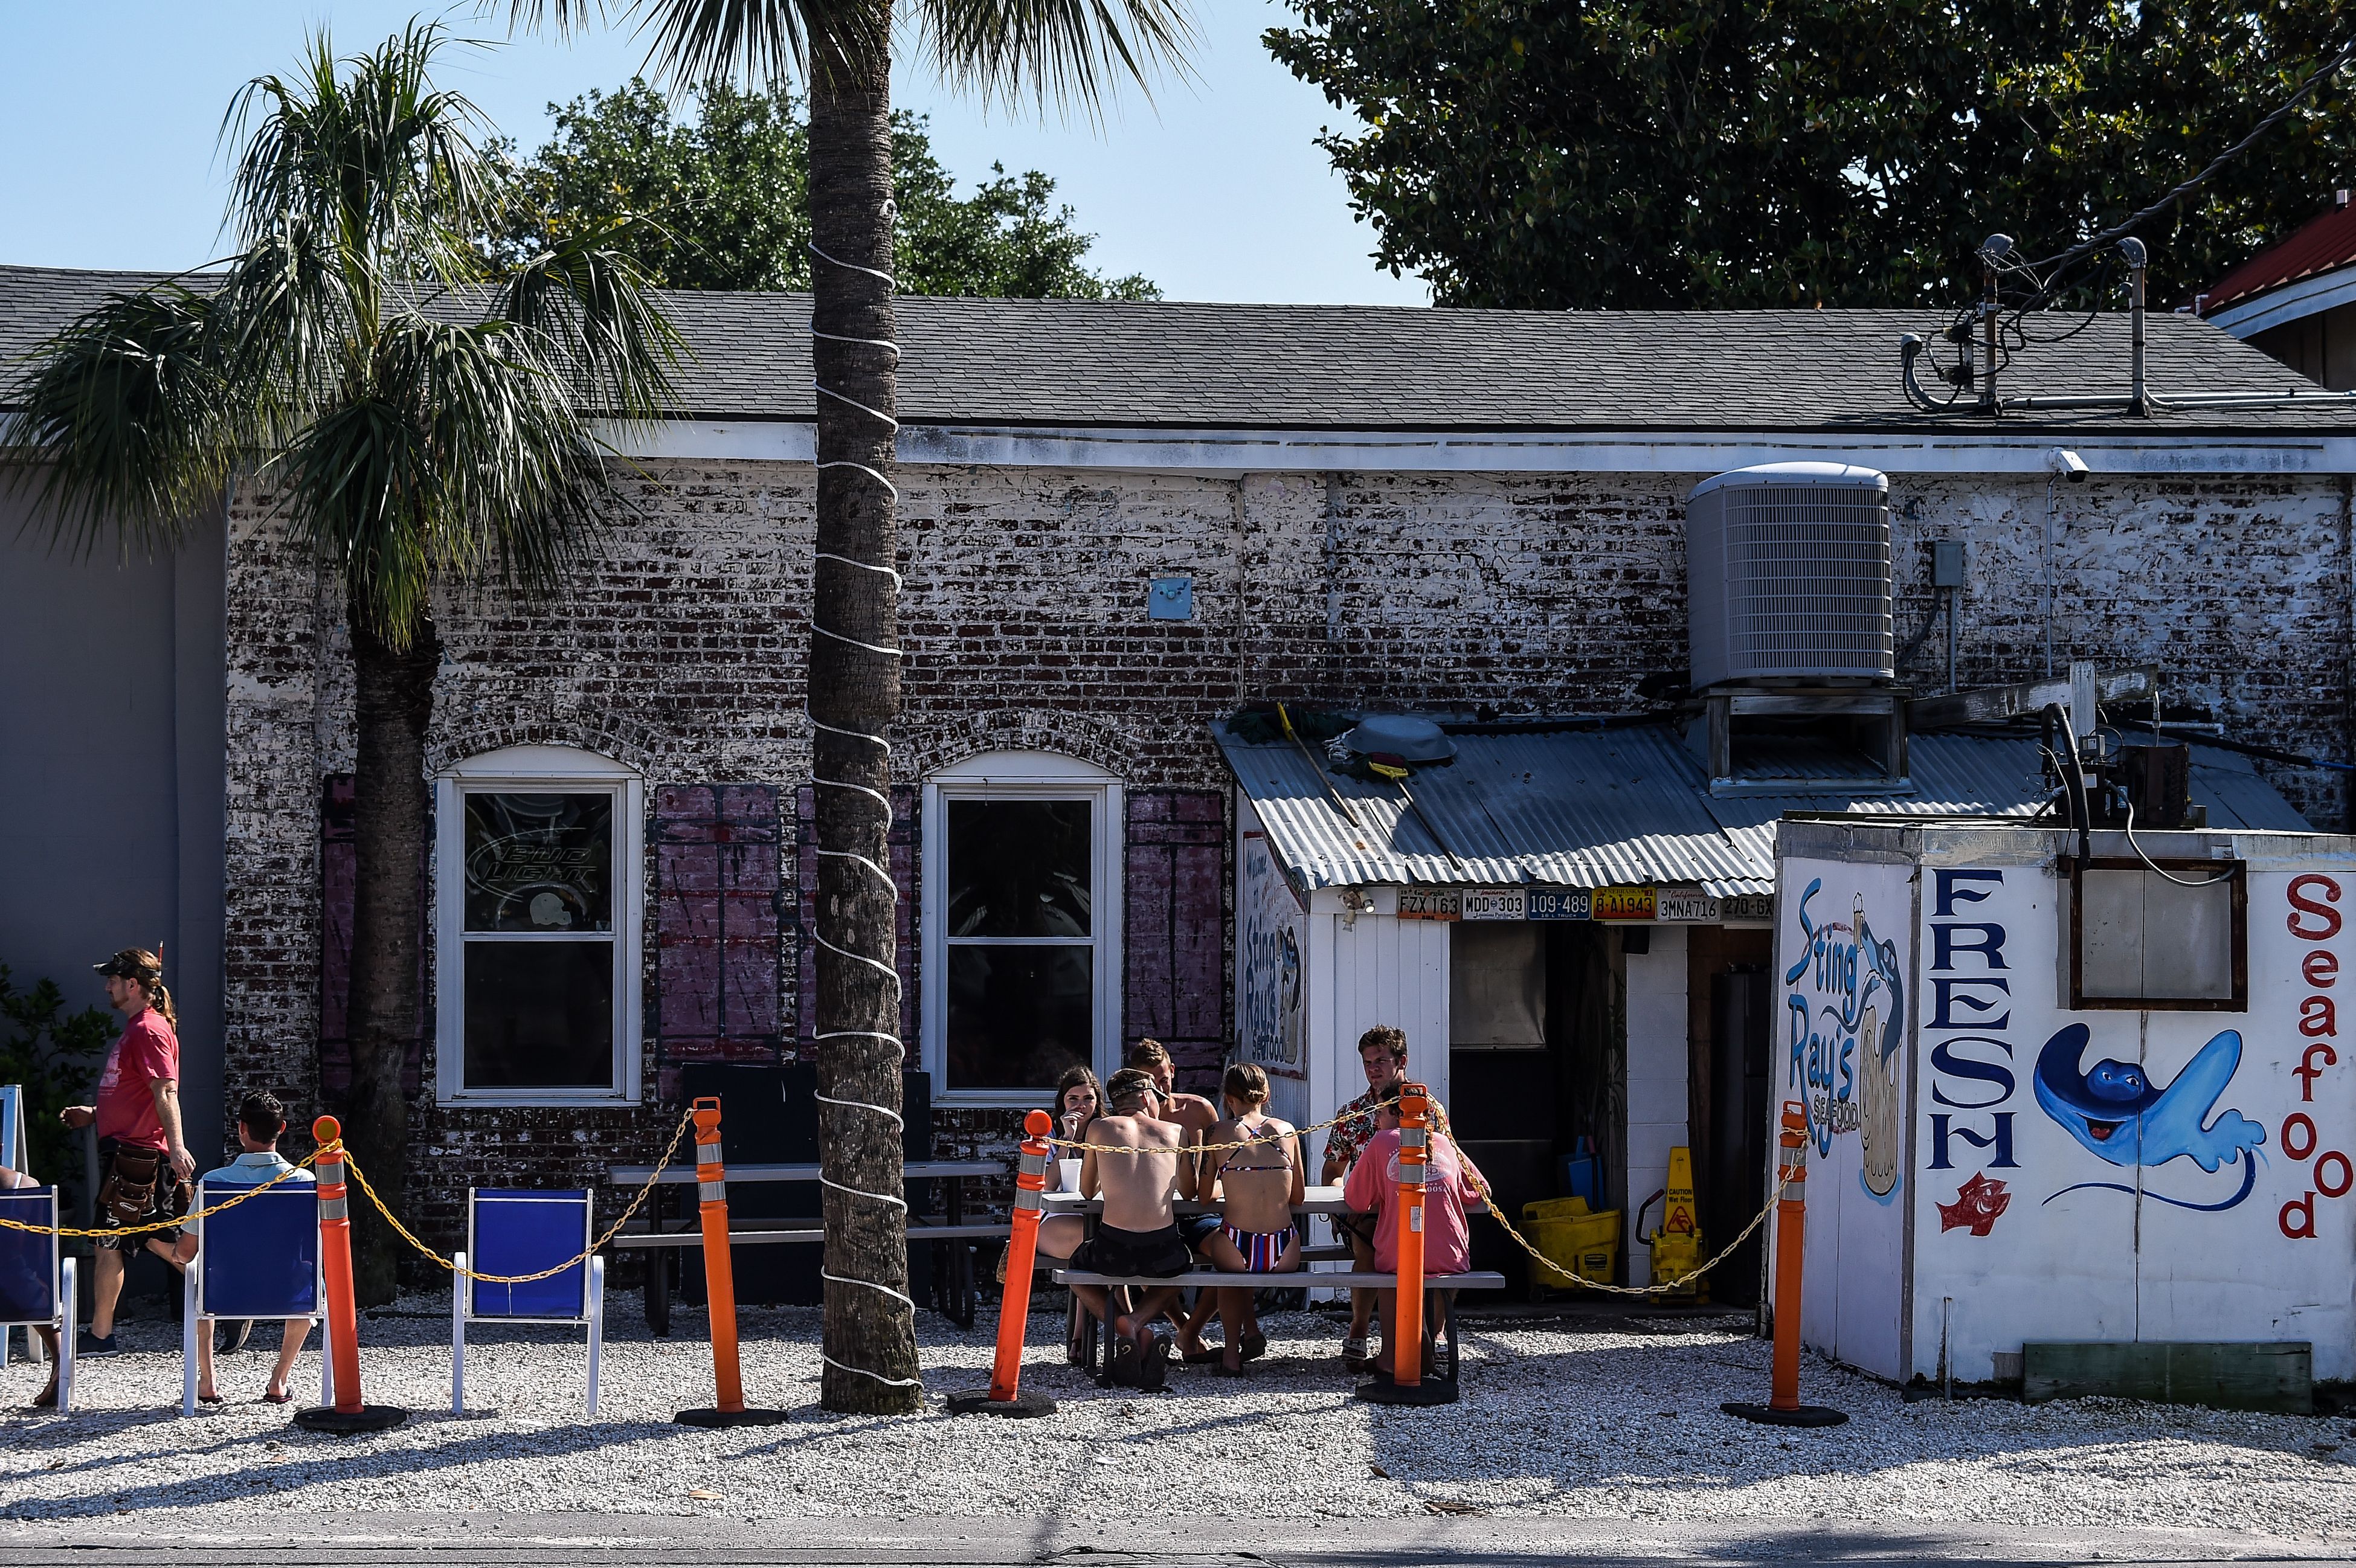 People sit and eat at a roadside food joint in Tybee Island, Georgia, on April 25.